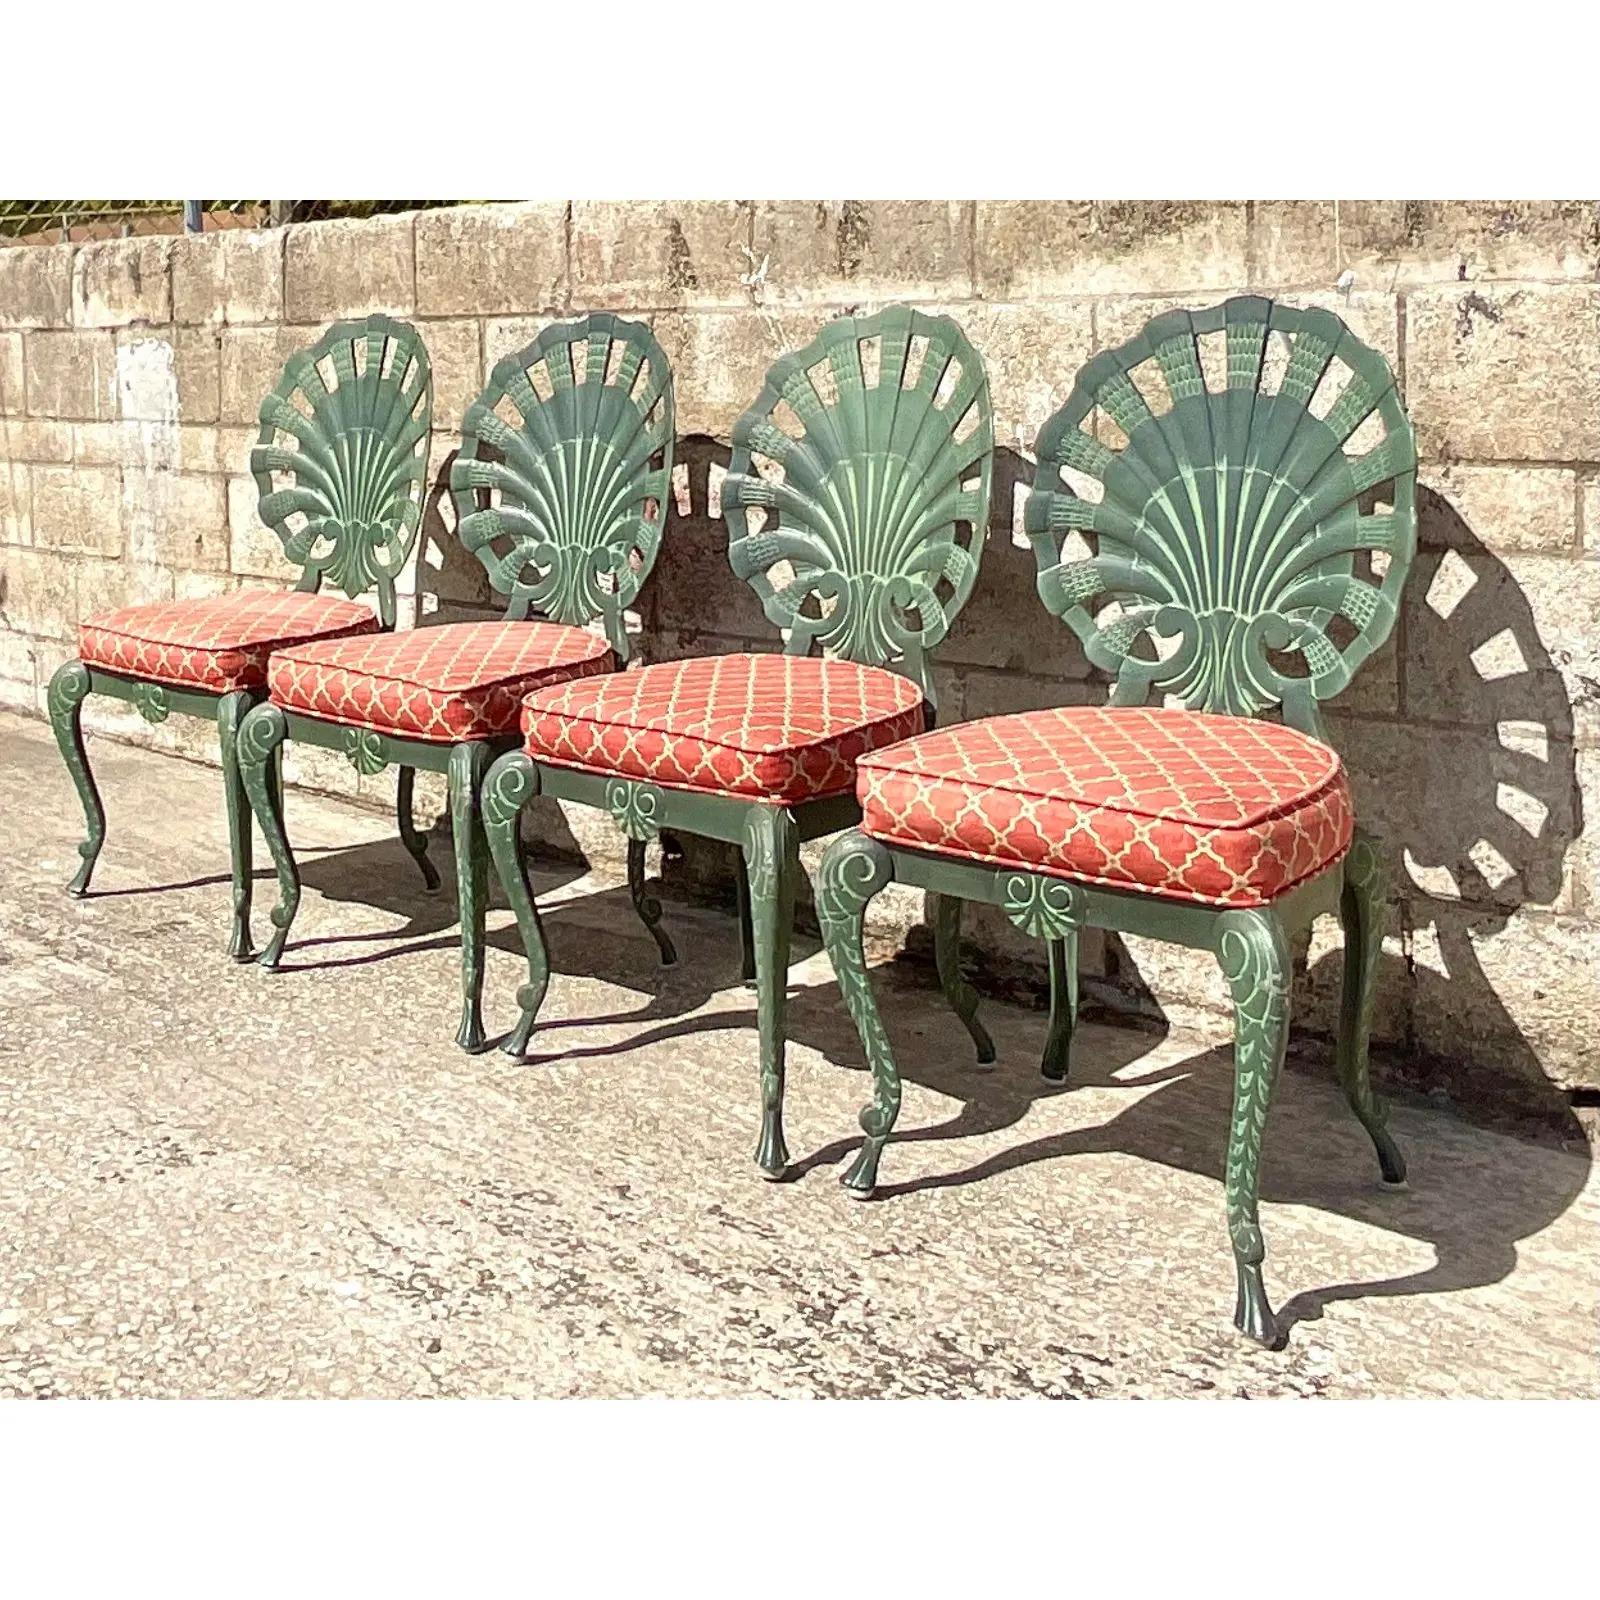 A fantastic set of vintage Coastal cast aluminum outdoor chairs. Made by the iconic Brown Jordan. Tagged, but the tag is painted over. Painted a custom deep jade green. Easily changed. Perfect for those homes located on or near the water. Acquired